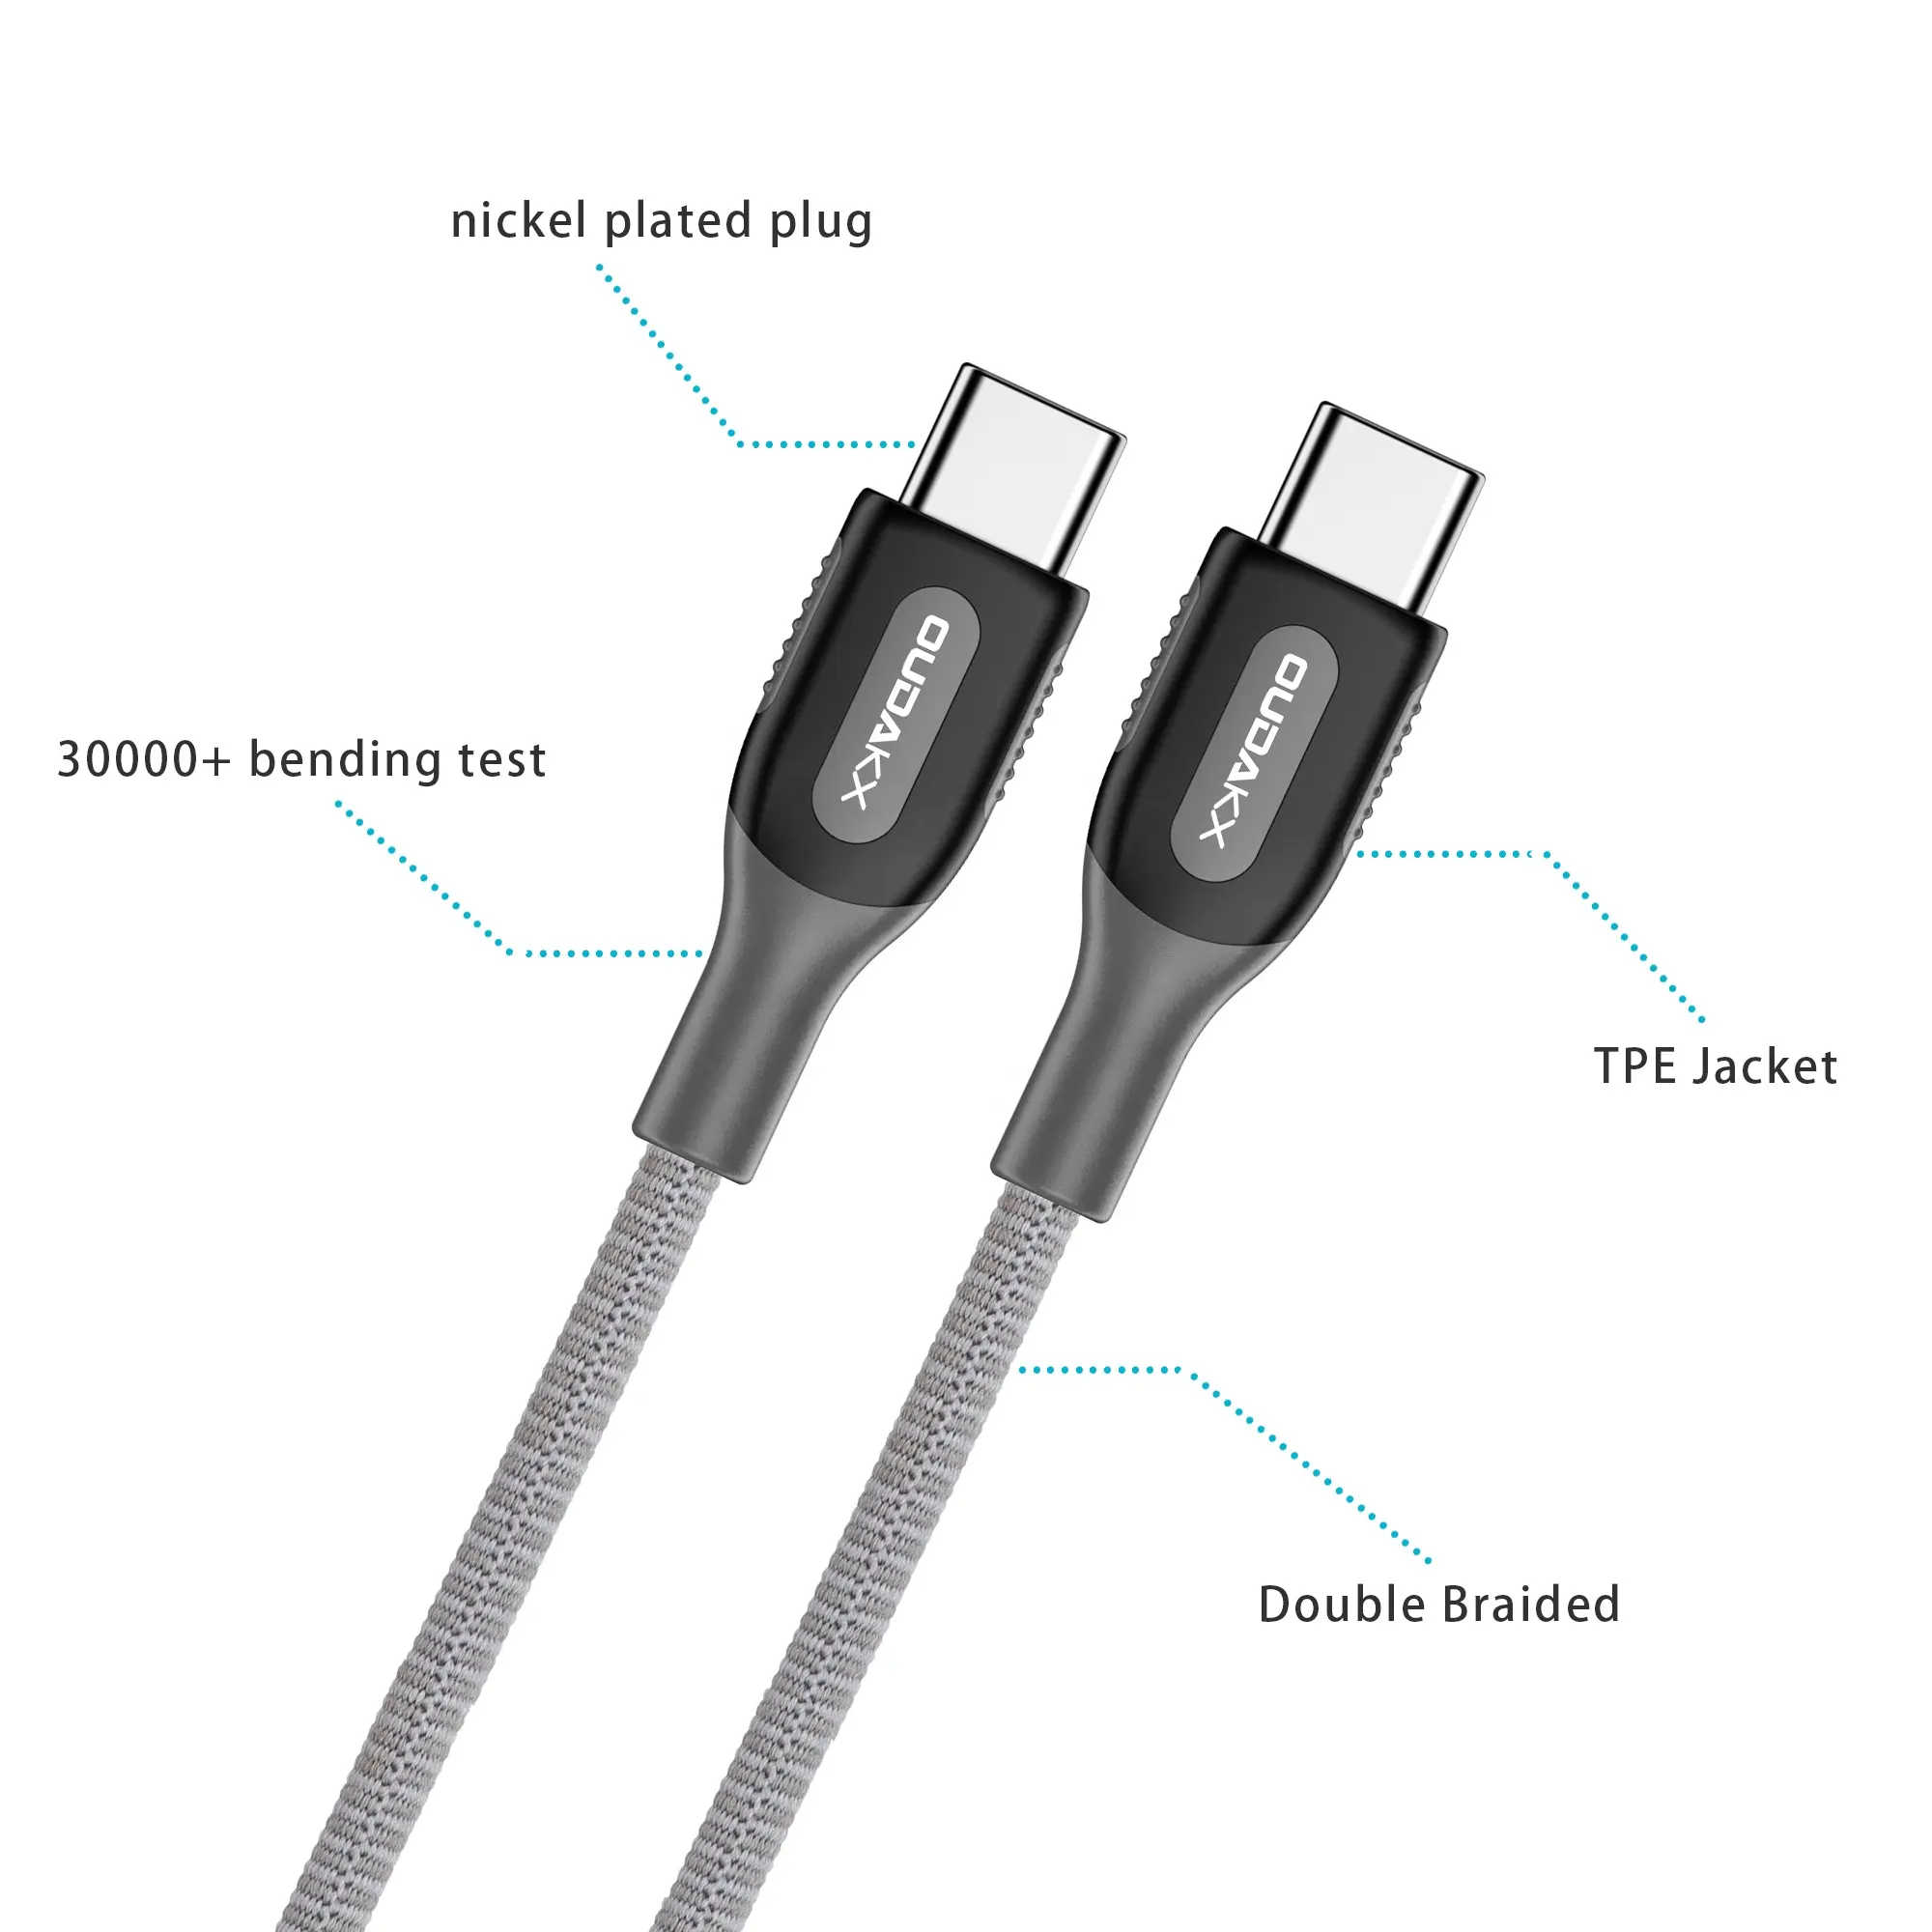 SuperCharge USB C Cable 3A for HuaWei Mate 9 Original Mate 9 Pro Cables Type A to Type C USB Data Super Quick Charge Cable